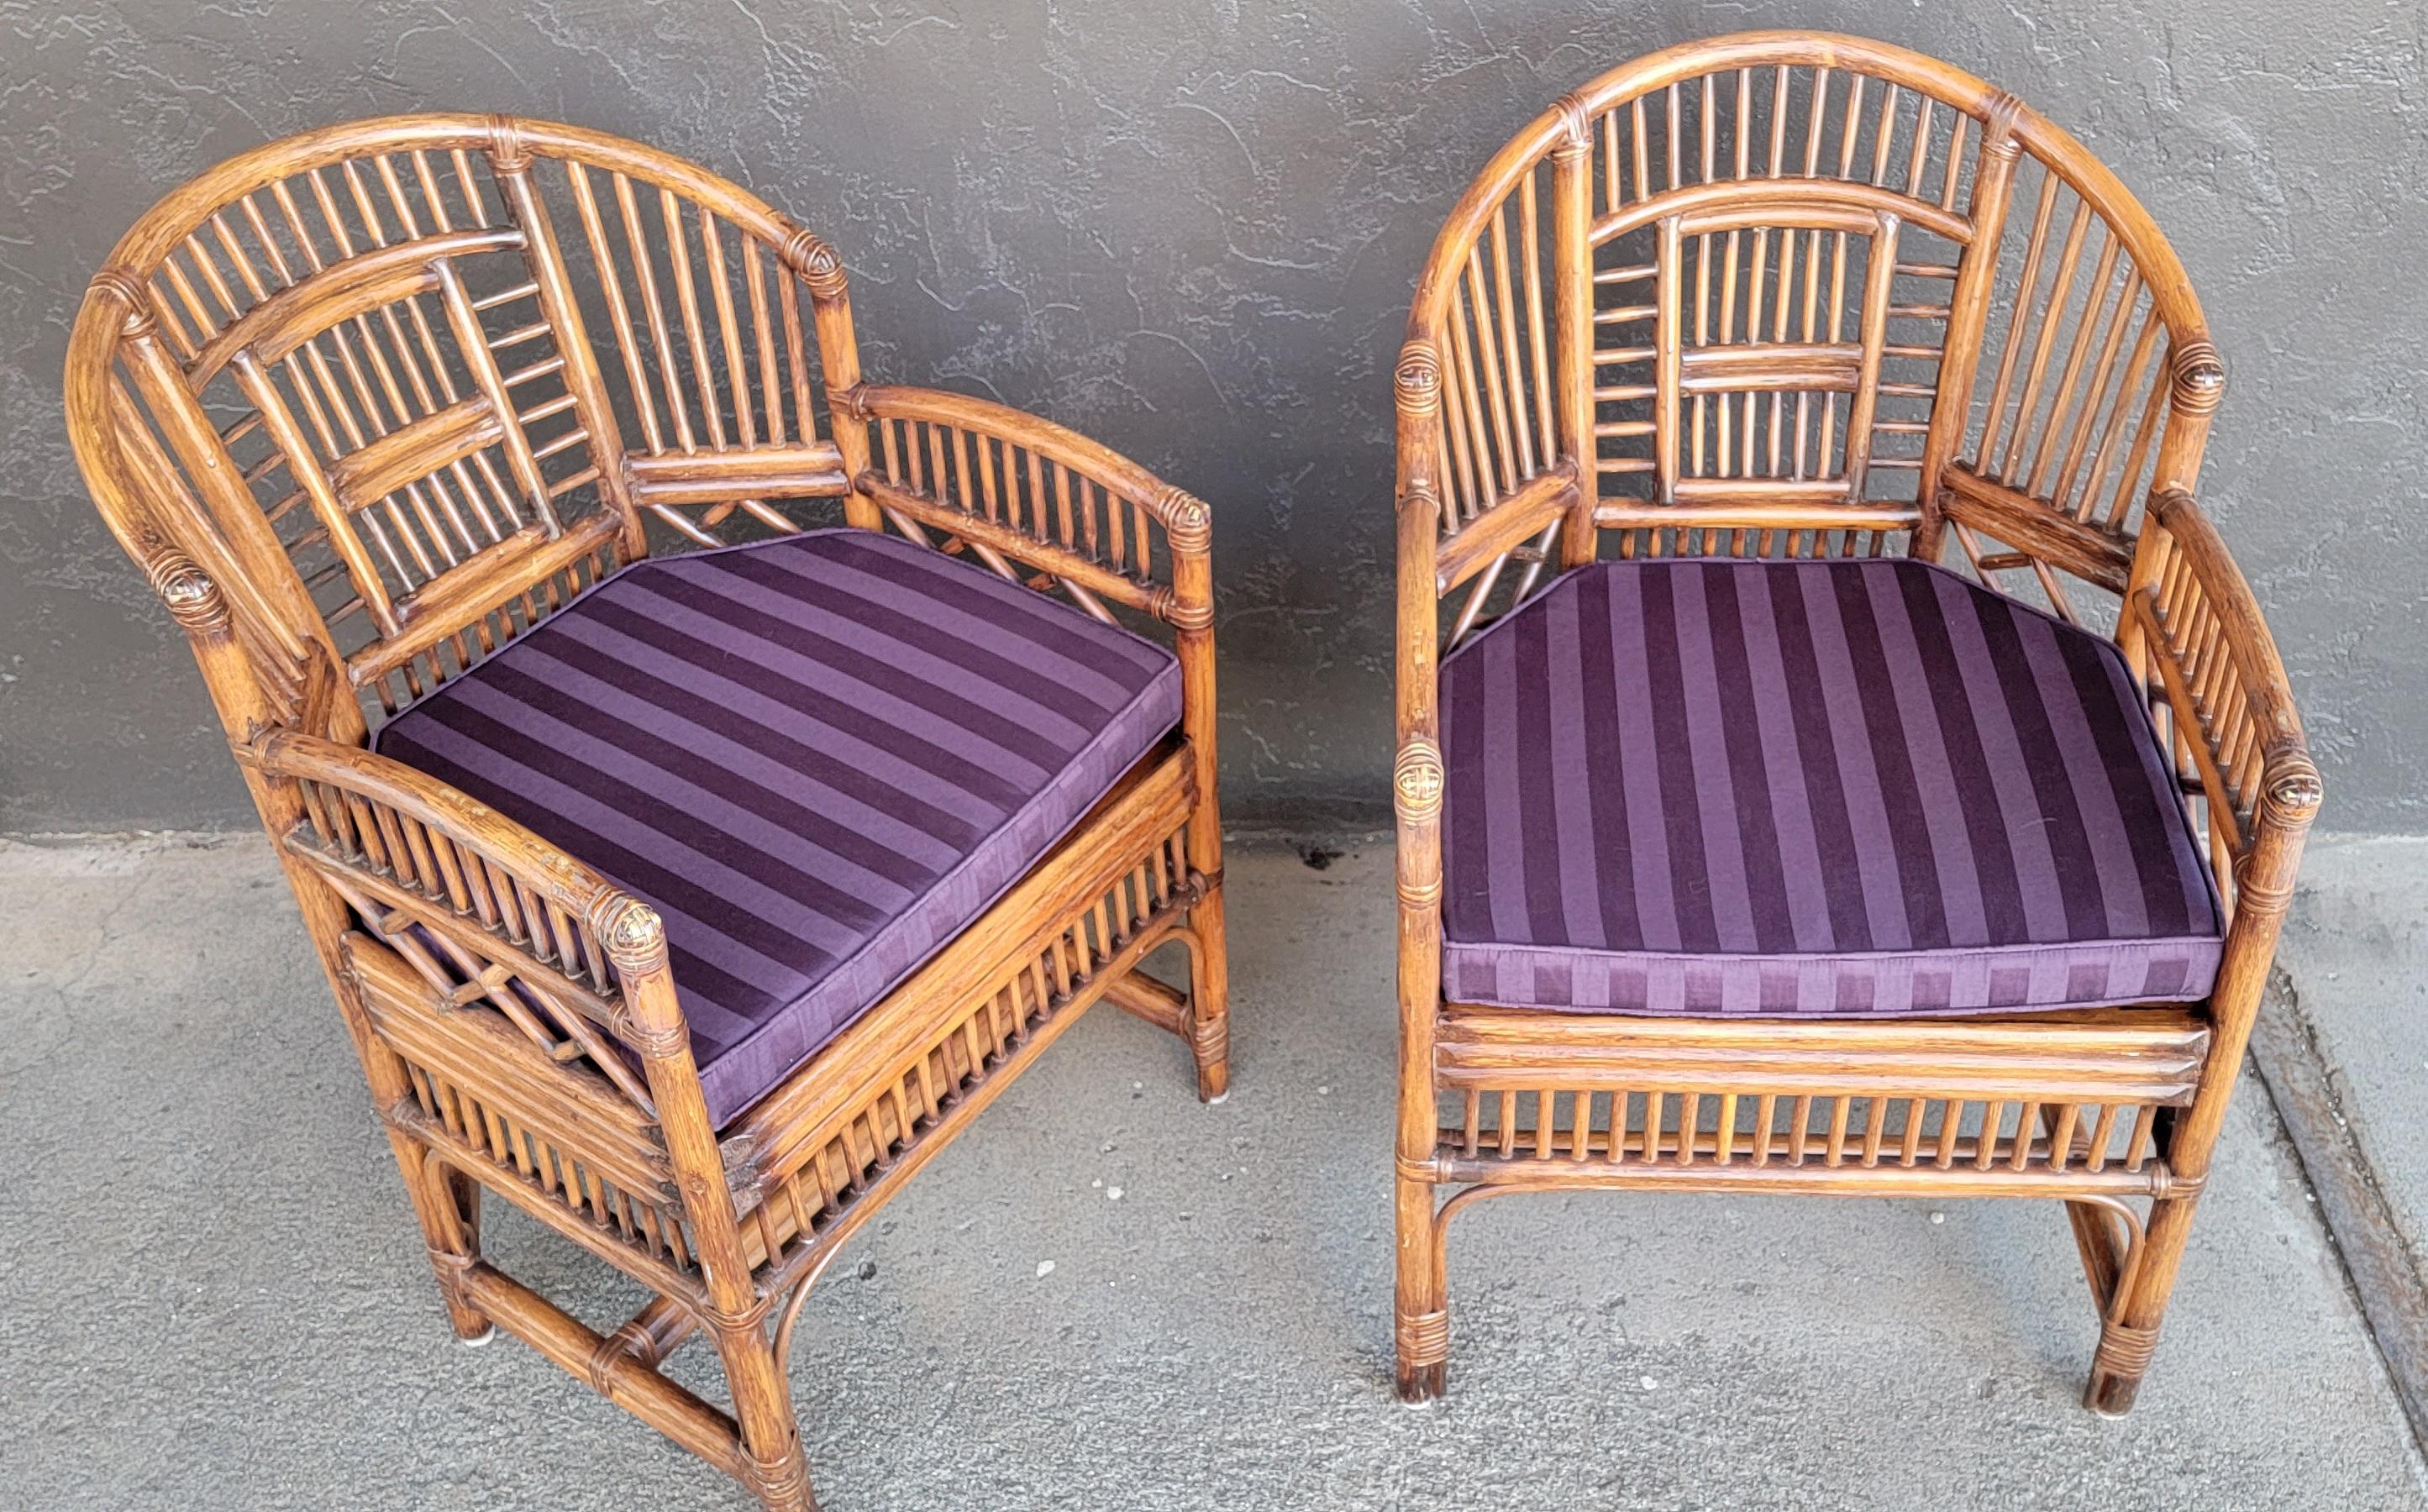 A pair of bamboo armchairs with cane seats. Very good original condition with scuffing to top surface of arms. Each chair has a reversible cushion. Late 20th century.